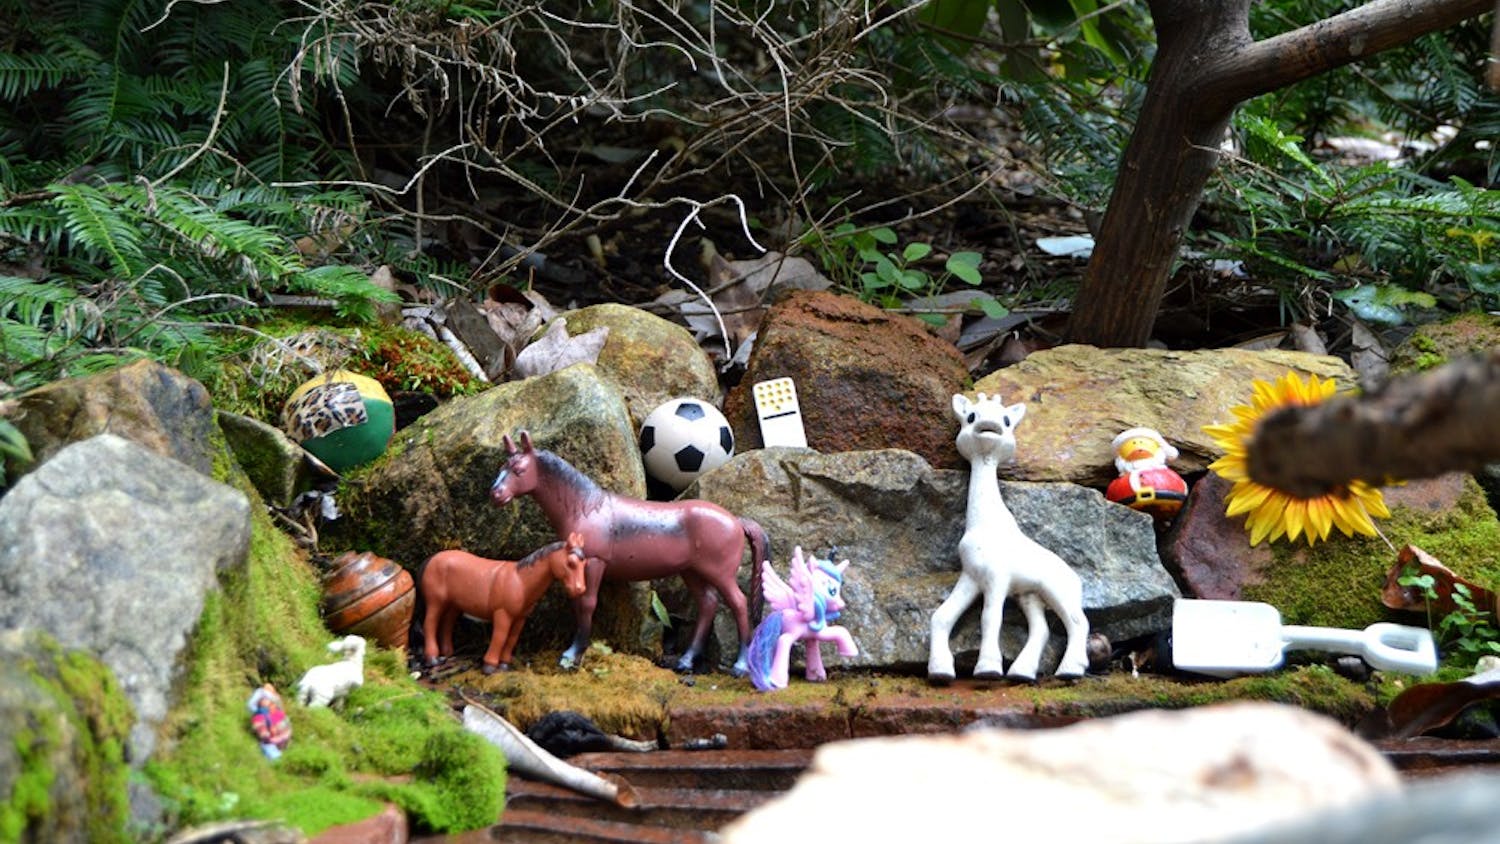 The Island of Misfit Toys, located in the Coker Arboretum, is a collection of abandoned toys found in the Arboretum and collected by the Arboretum staff.